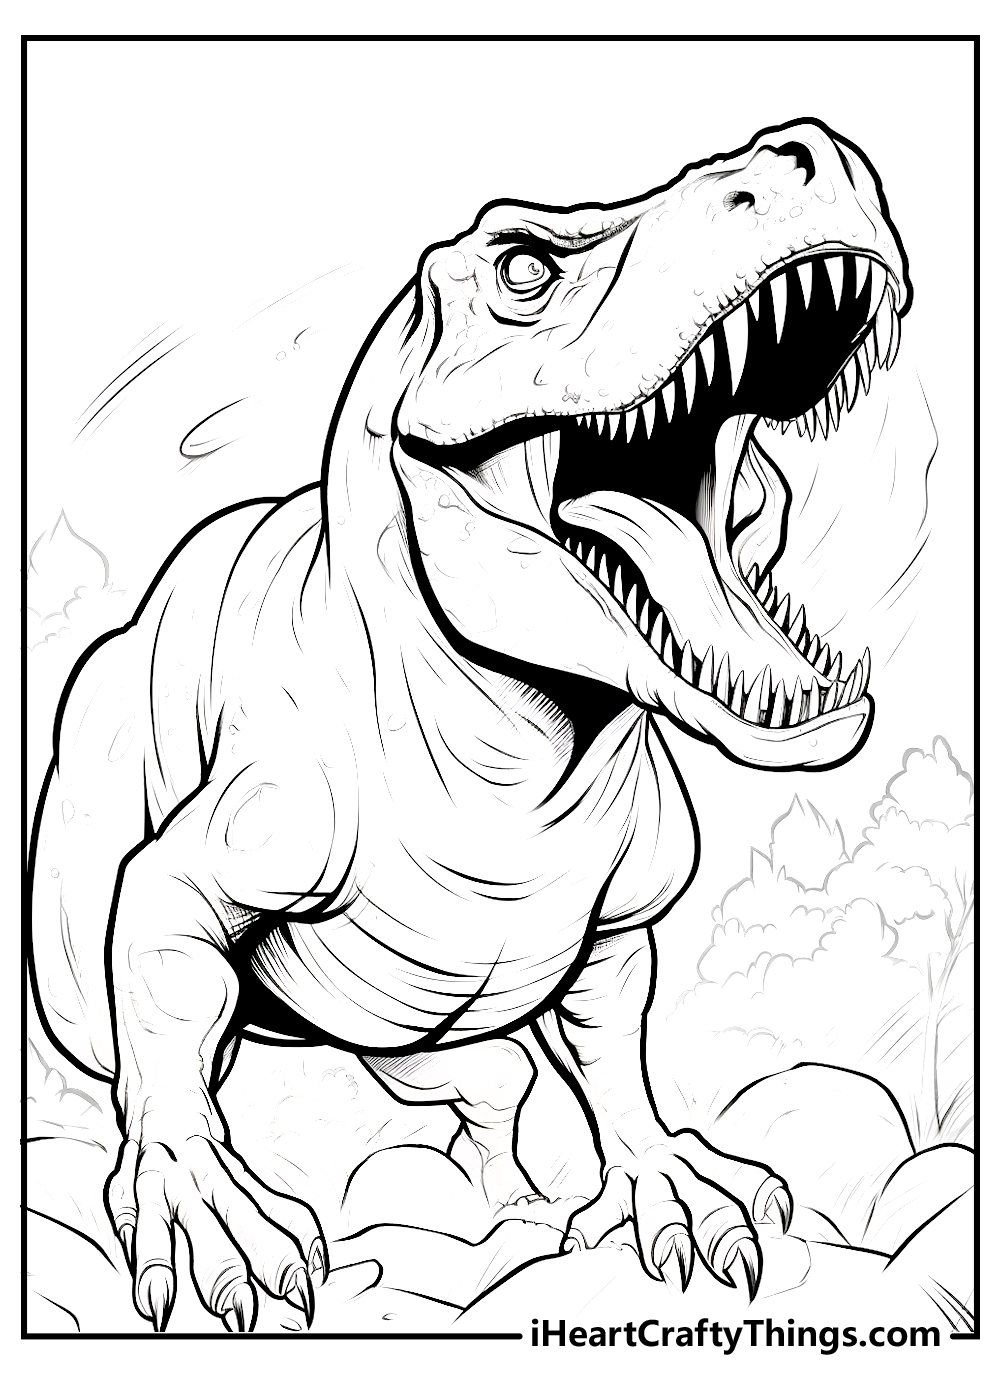 Tyrannosaurus coloring pages free printables